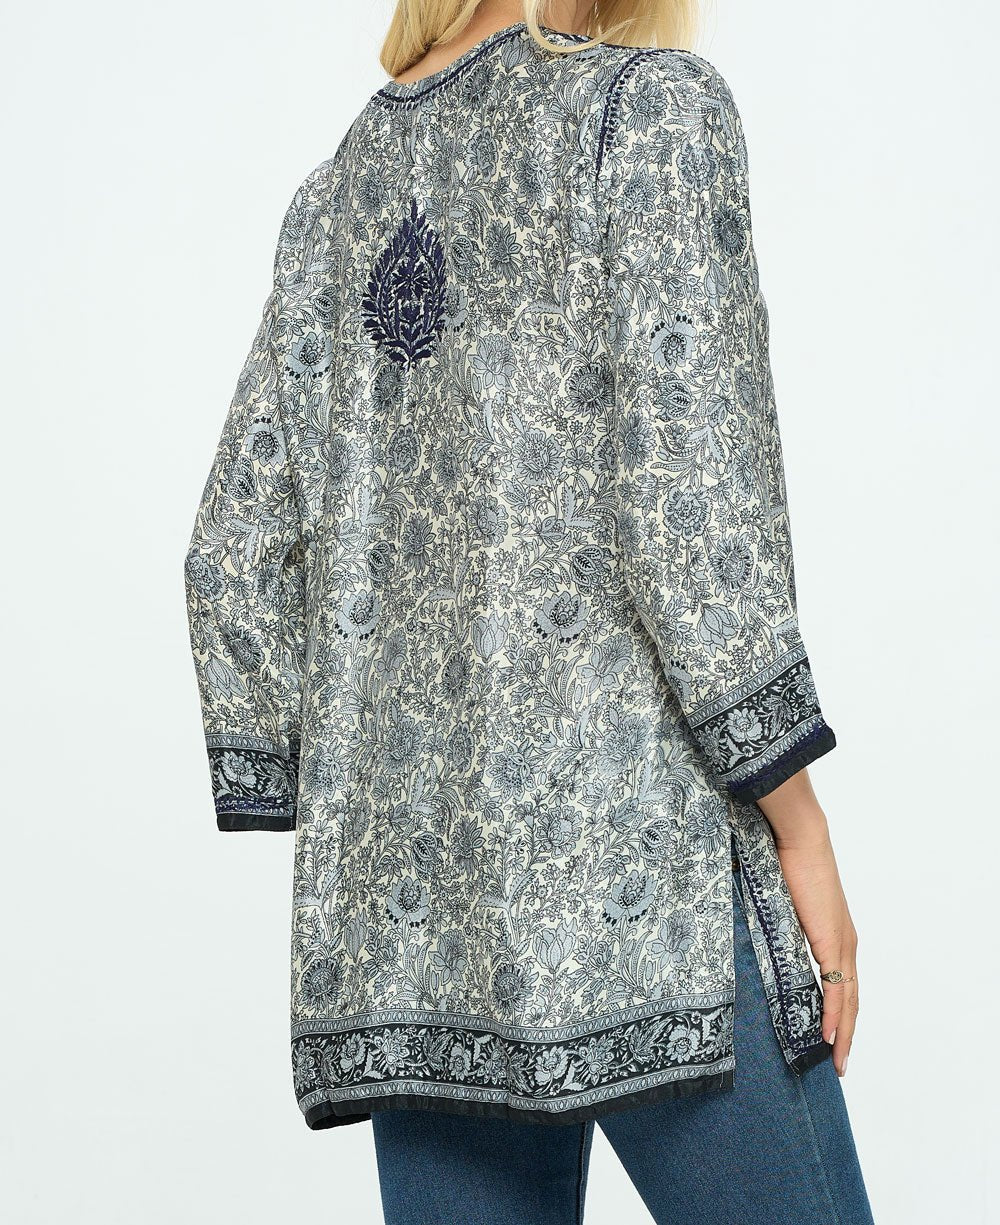 Midnight Floral Garden Embroidered Tunic Top - Shirts and Tops S